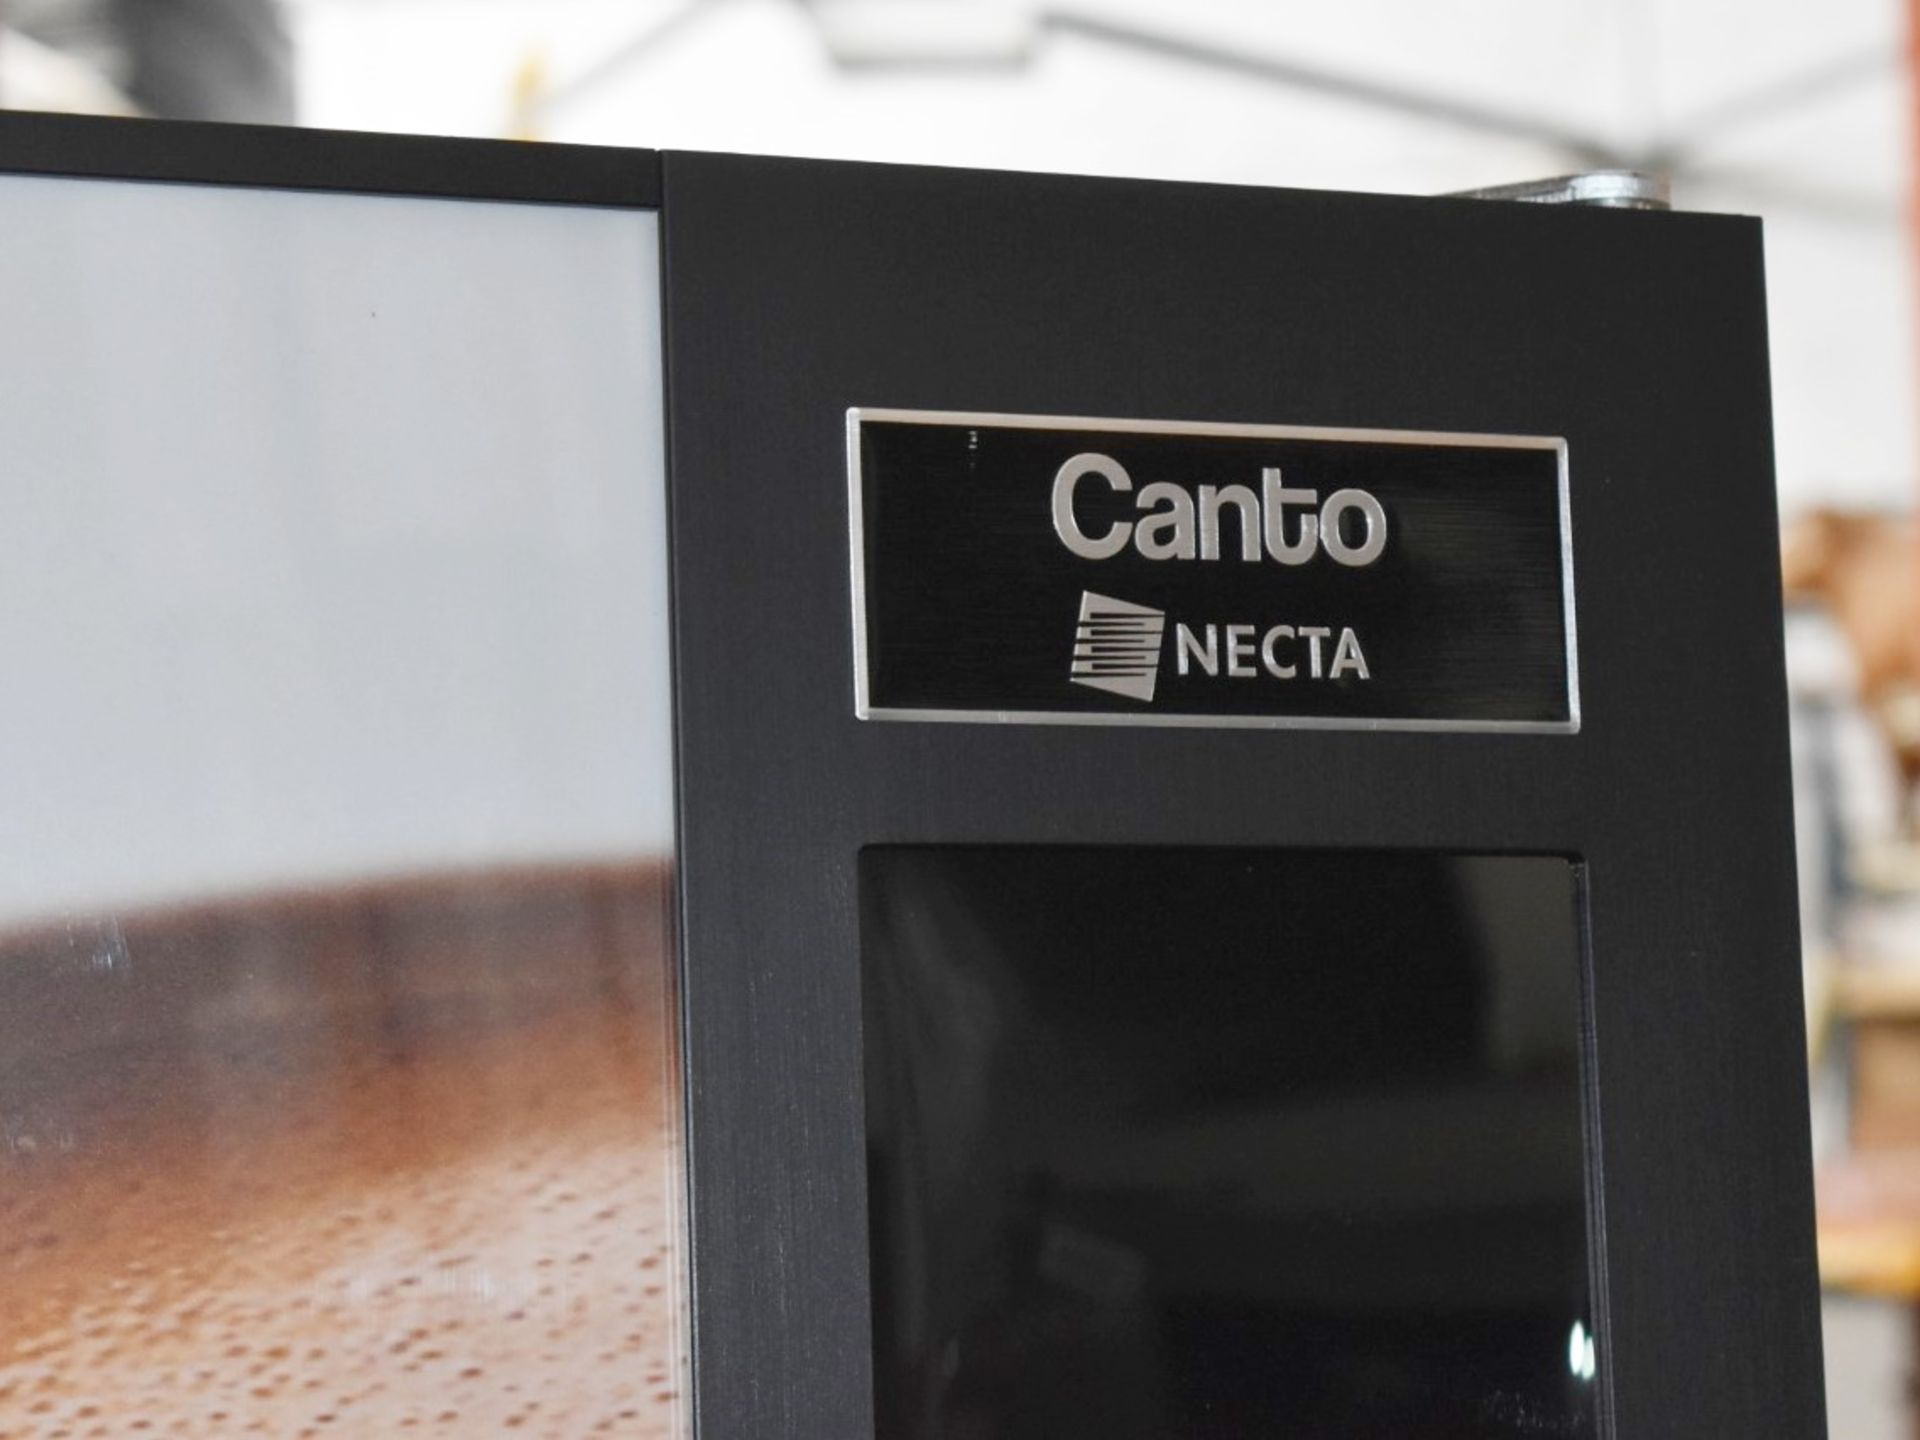 1 x Canto Necto Touch Hot Drinks Vending Machine - 21.5 Inch Touch Screen Display With Audio - - Image 3 of 31